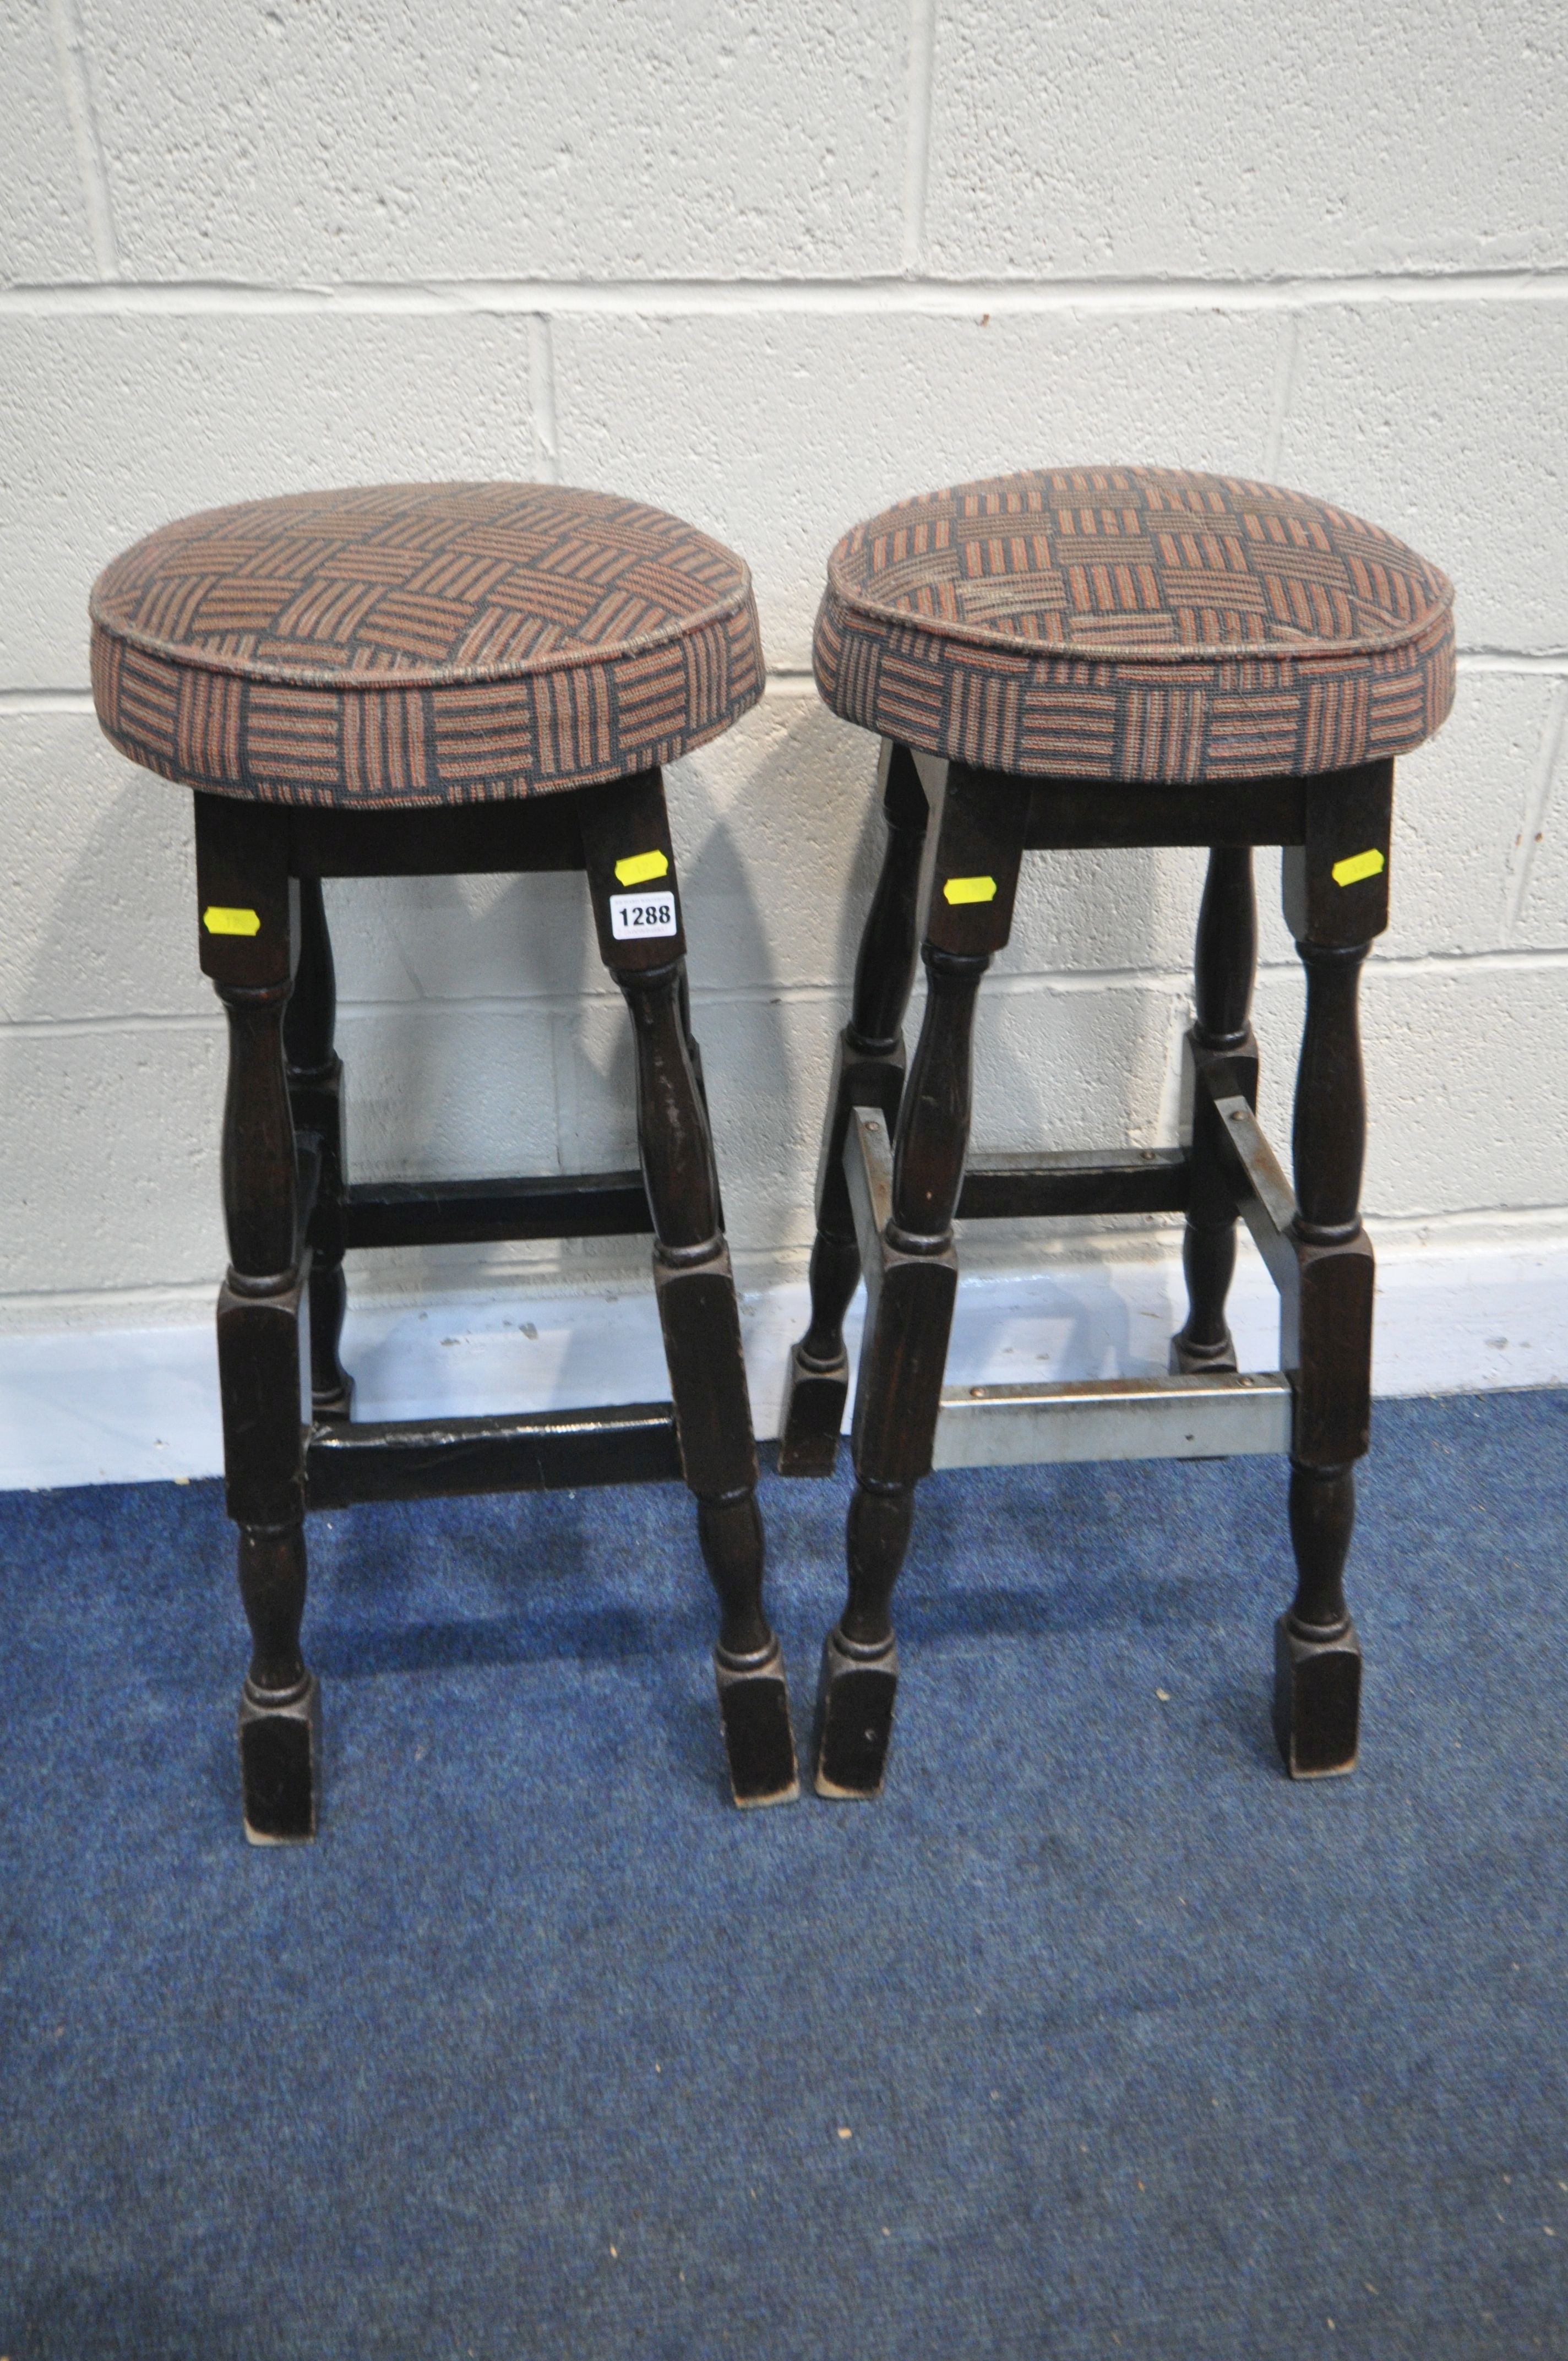 A PAIR OF 20TH CENTURY PUB STOOLS, height 77cm (condition - worn upholstery, heavily stained, one